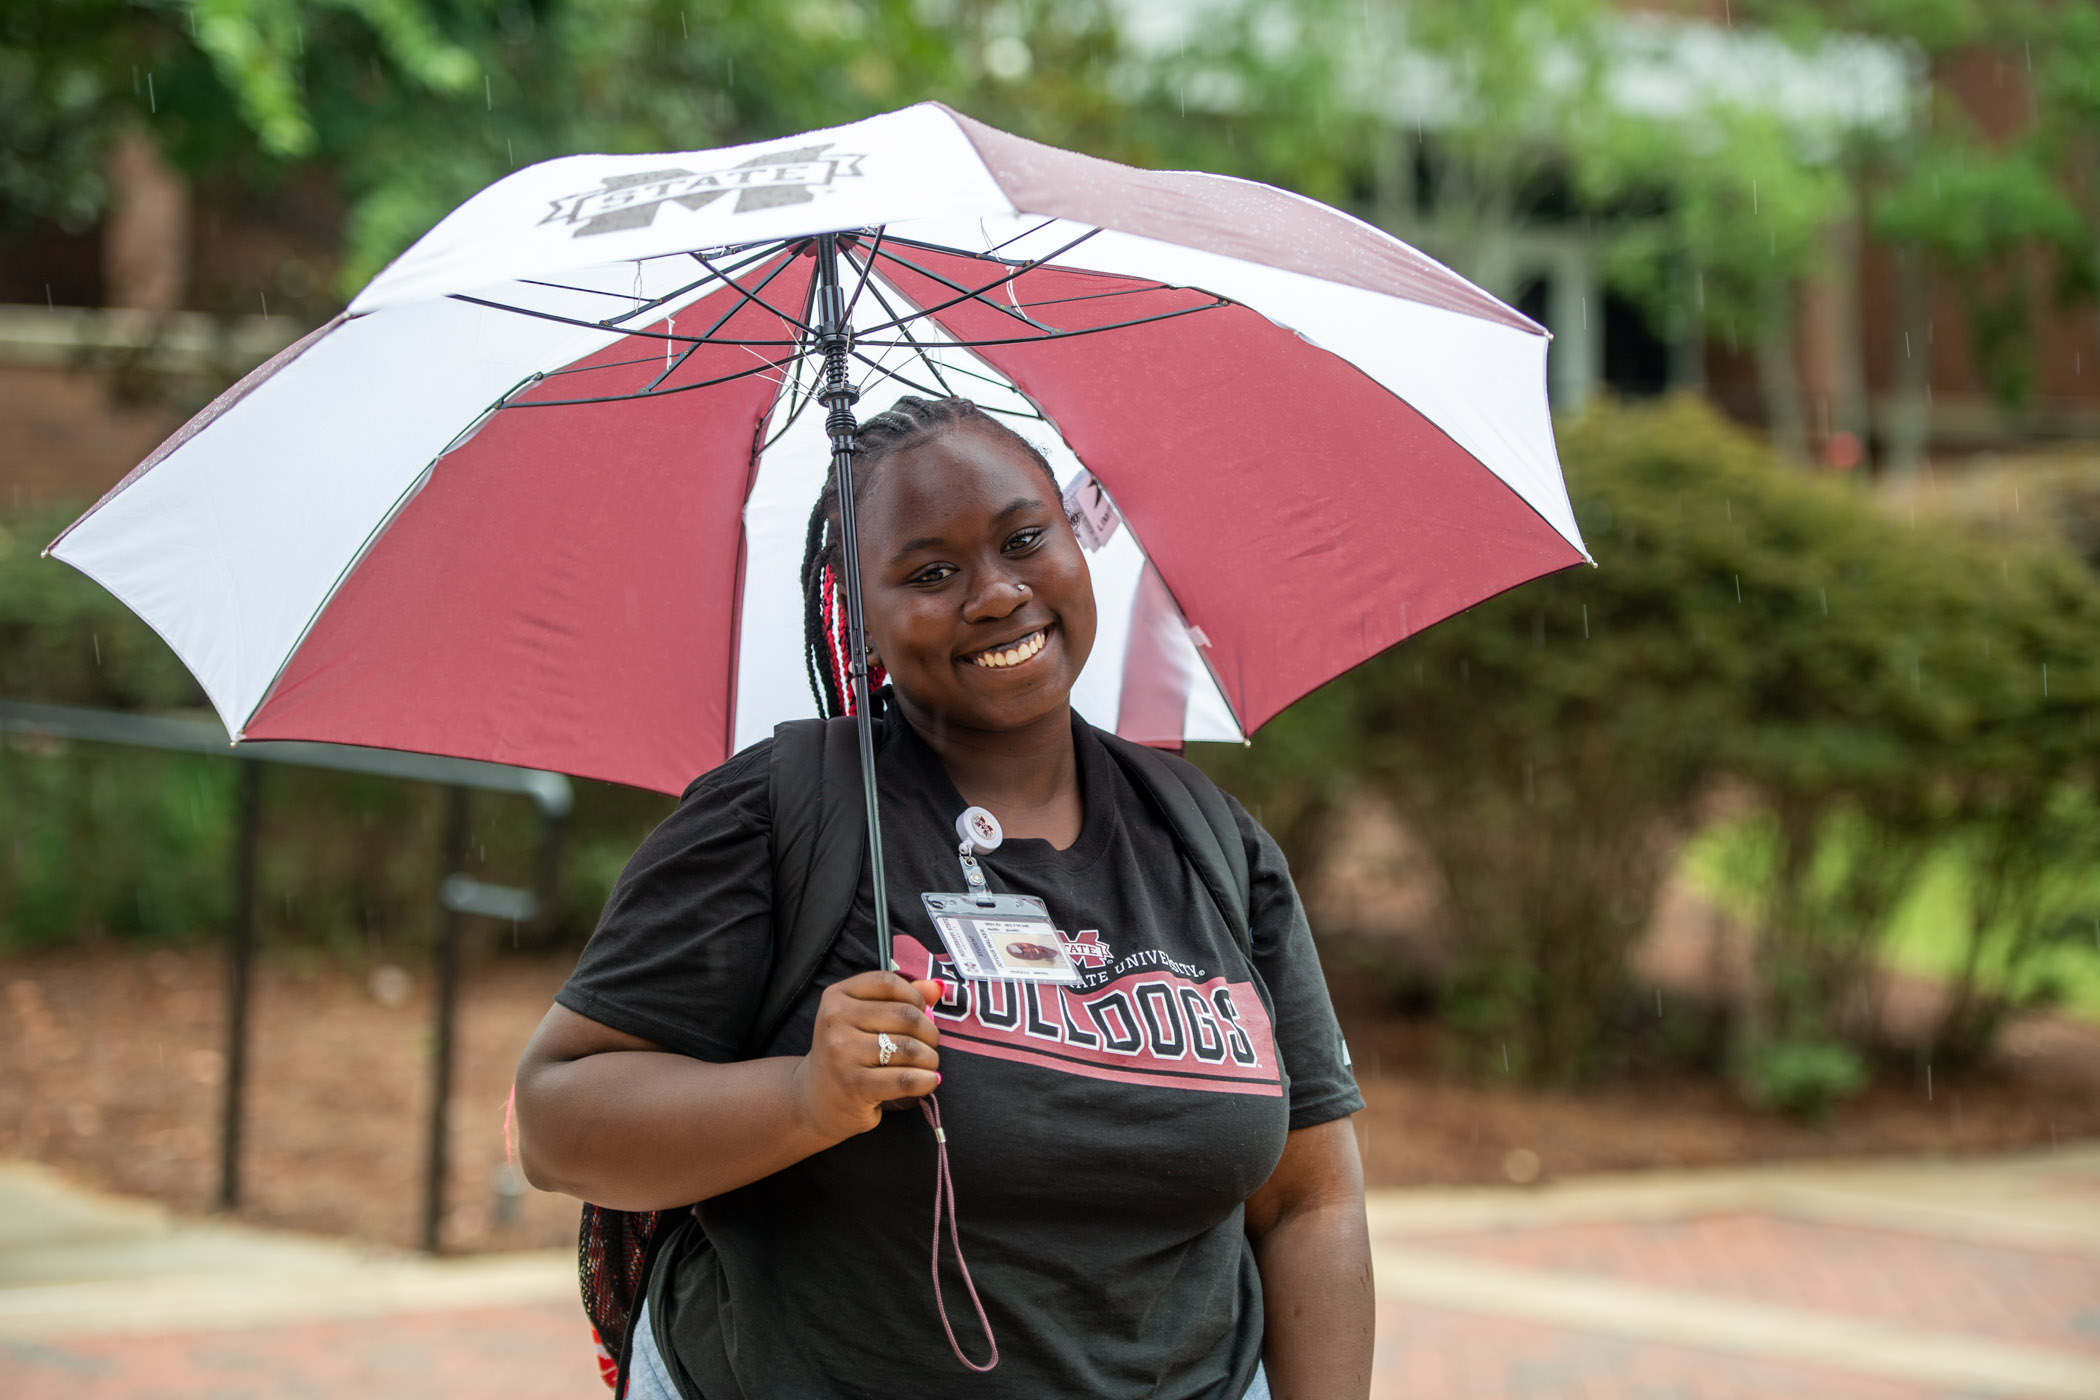 Smiling student, Joyous Walker, sports a large MSU umbrella with cheer despite a rainy first day back on campus